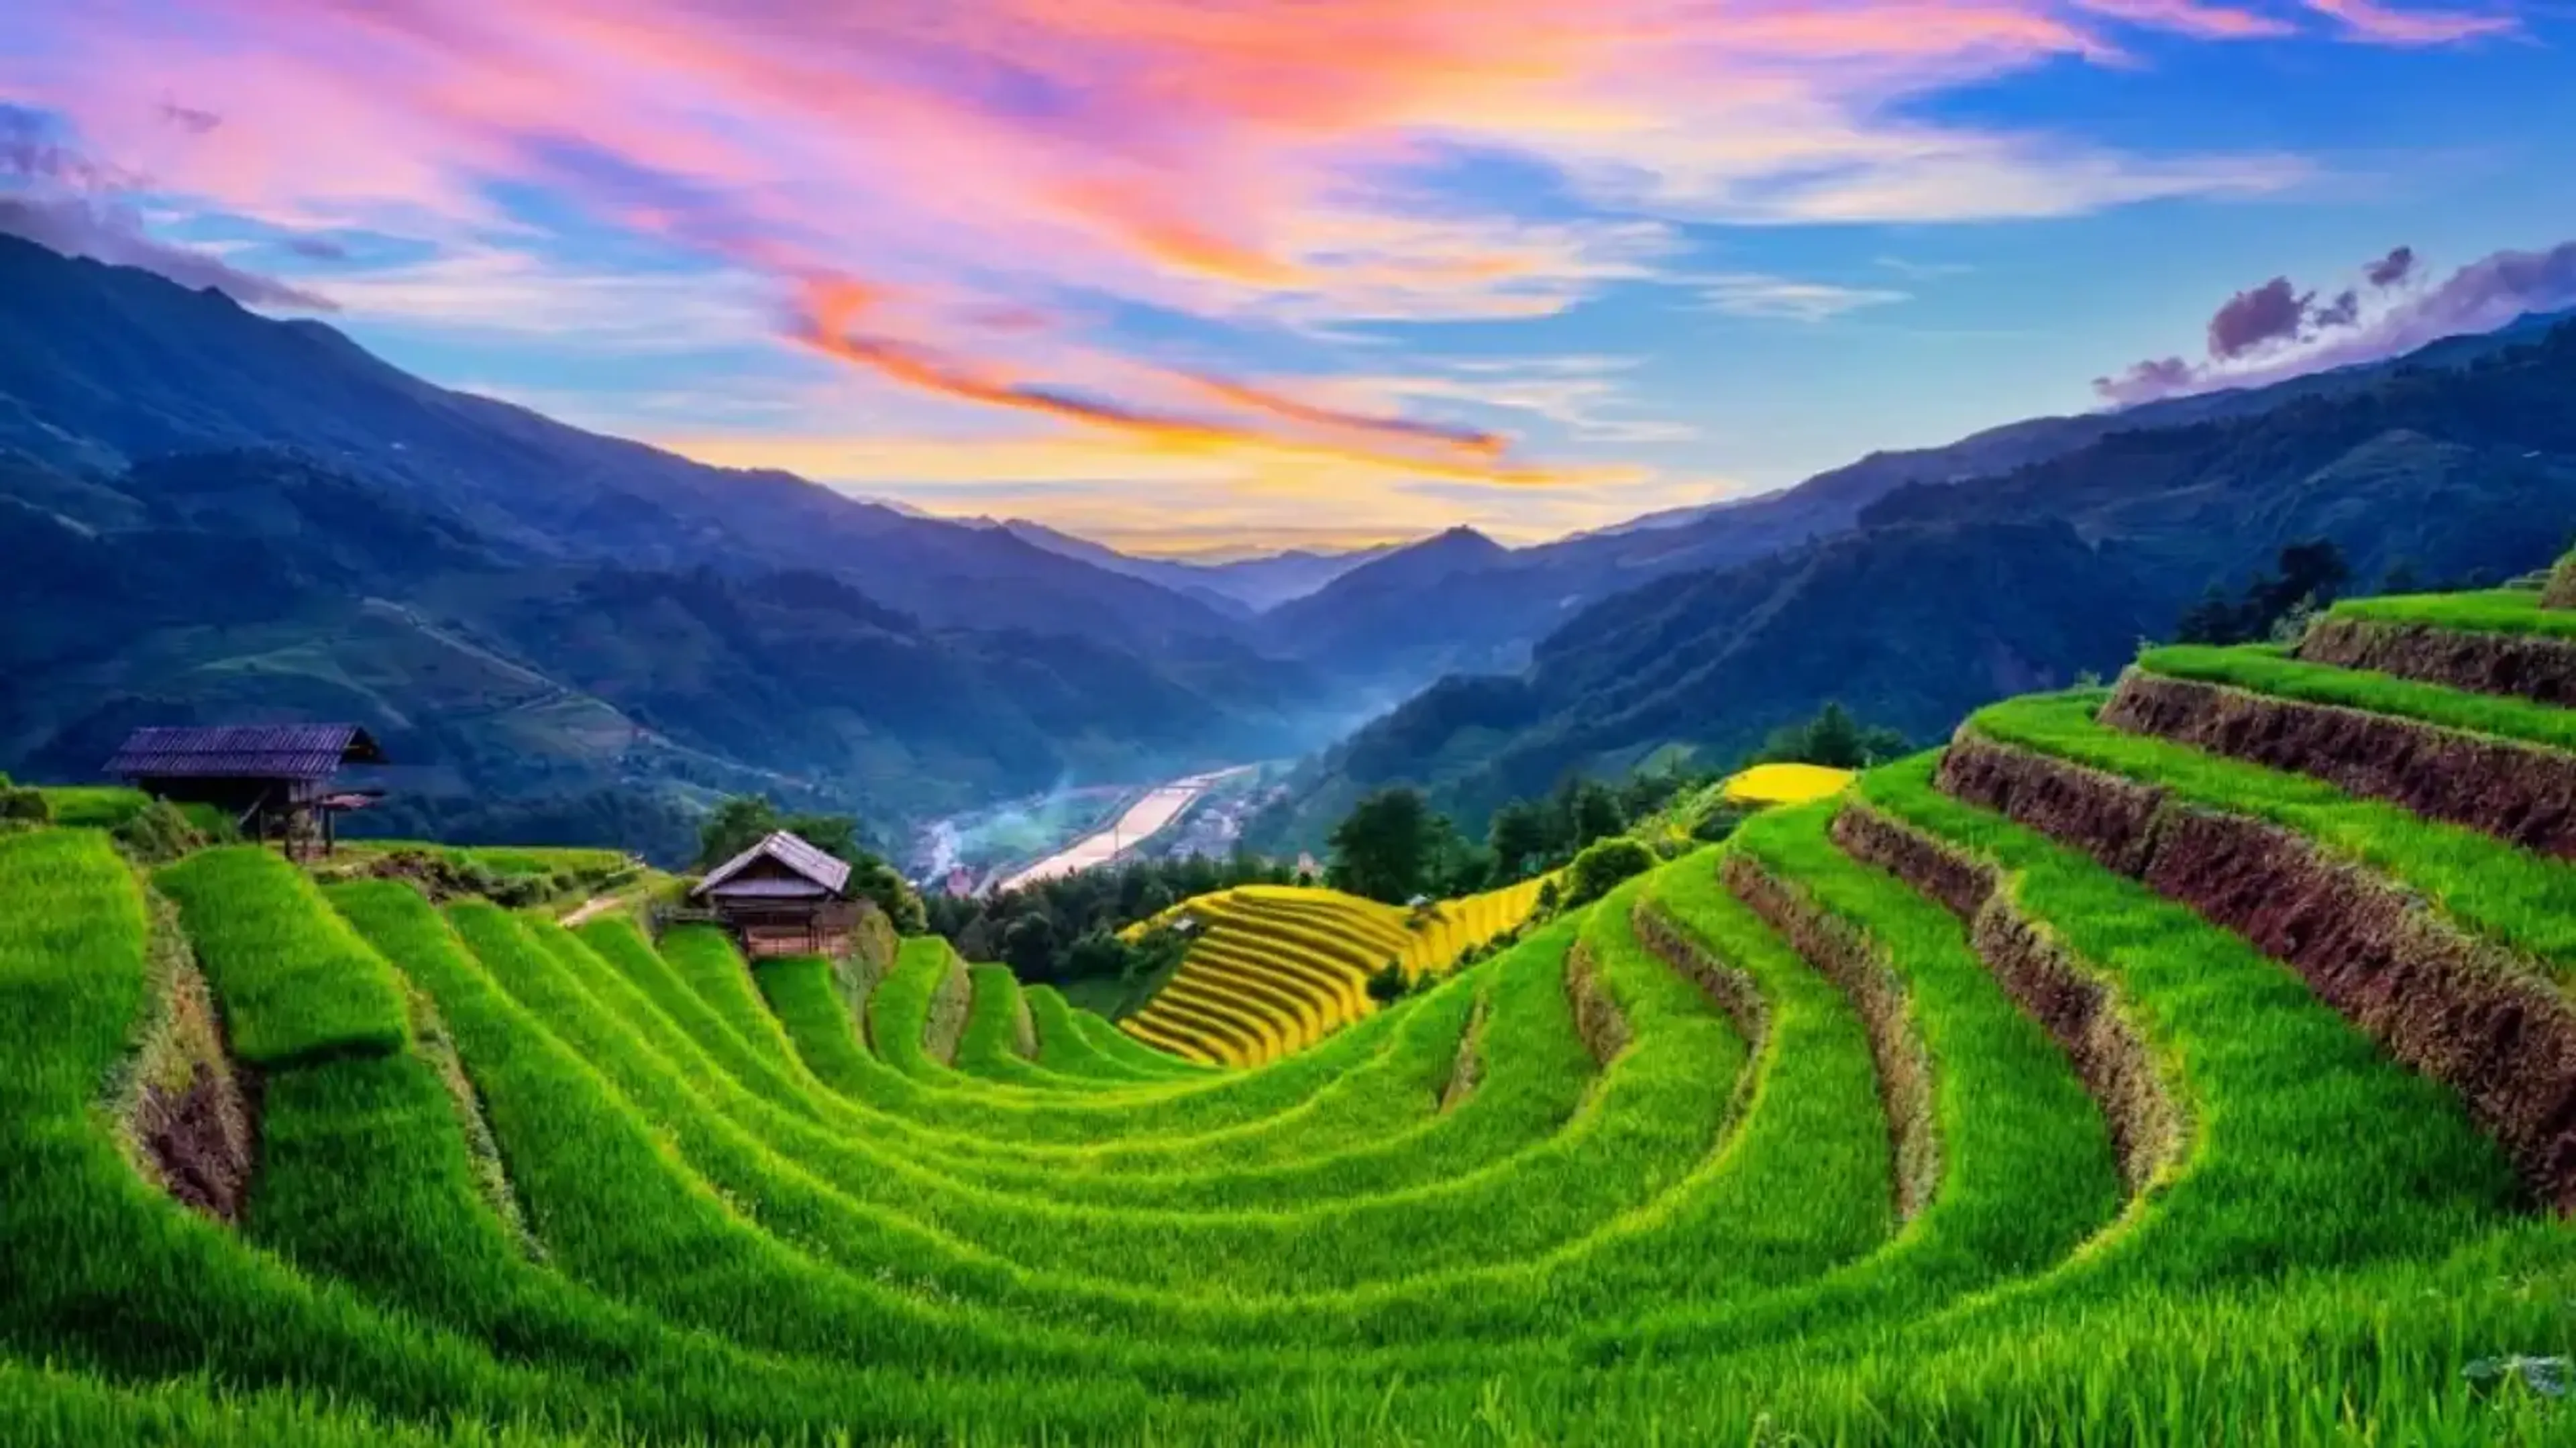 What is the most beautiful season of the year to travel to Sapa